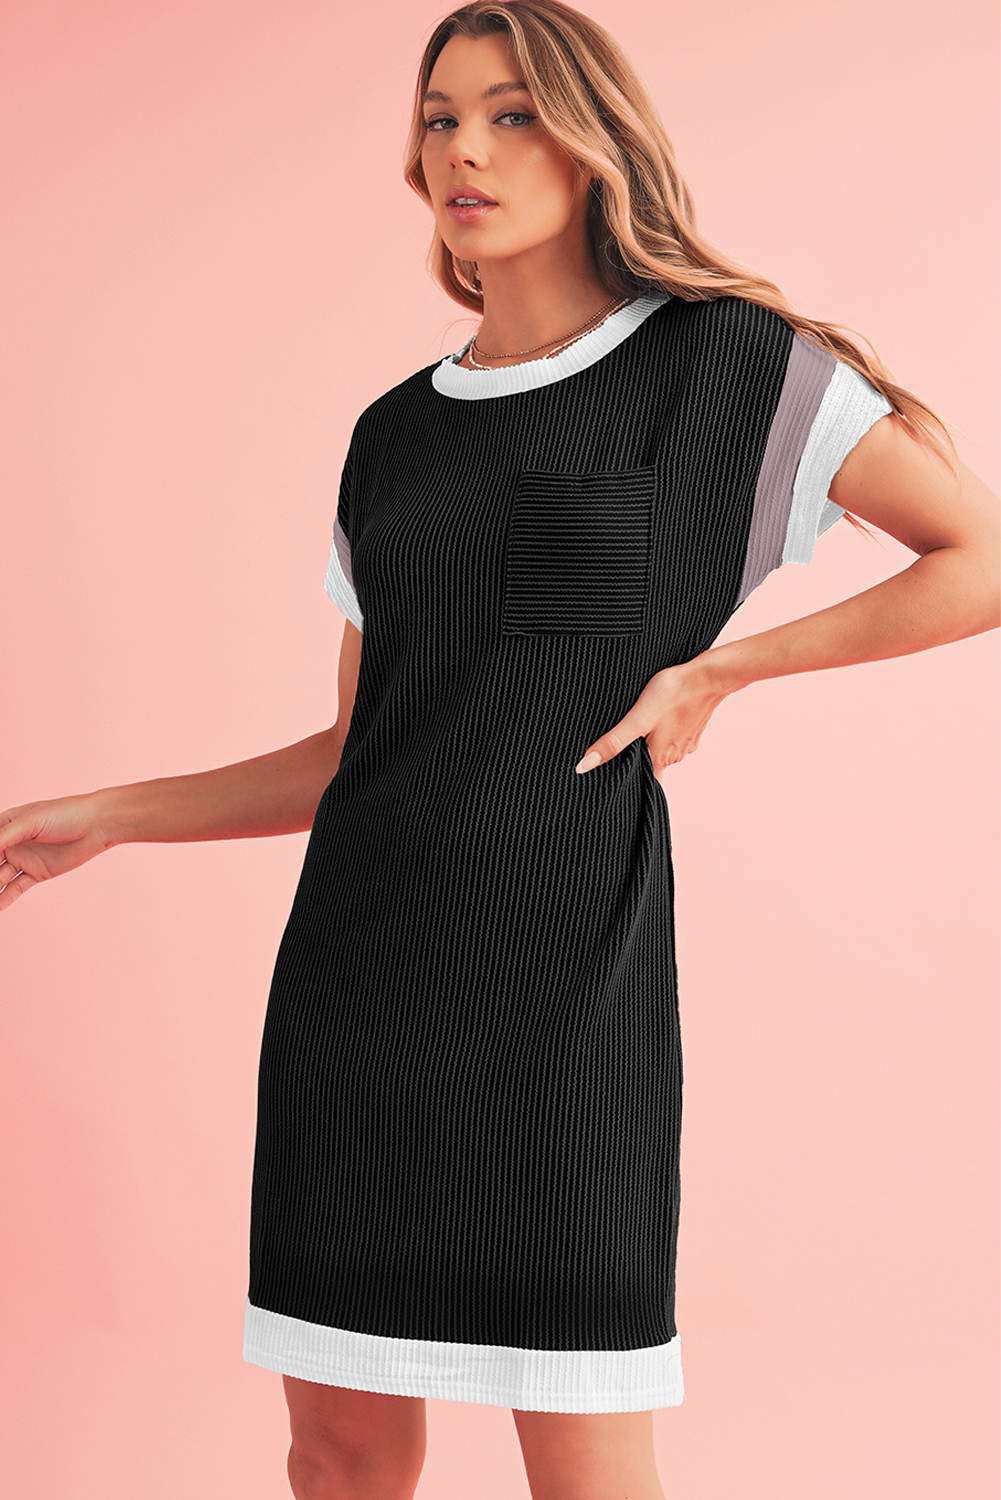 Shewin Wholesale CLOTHING Black Ribbed Colorblock Patched Pocket T Shirt Dress